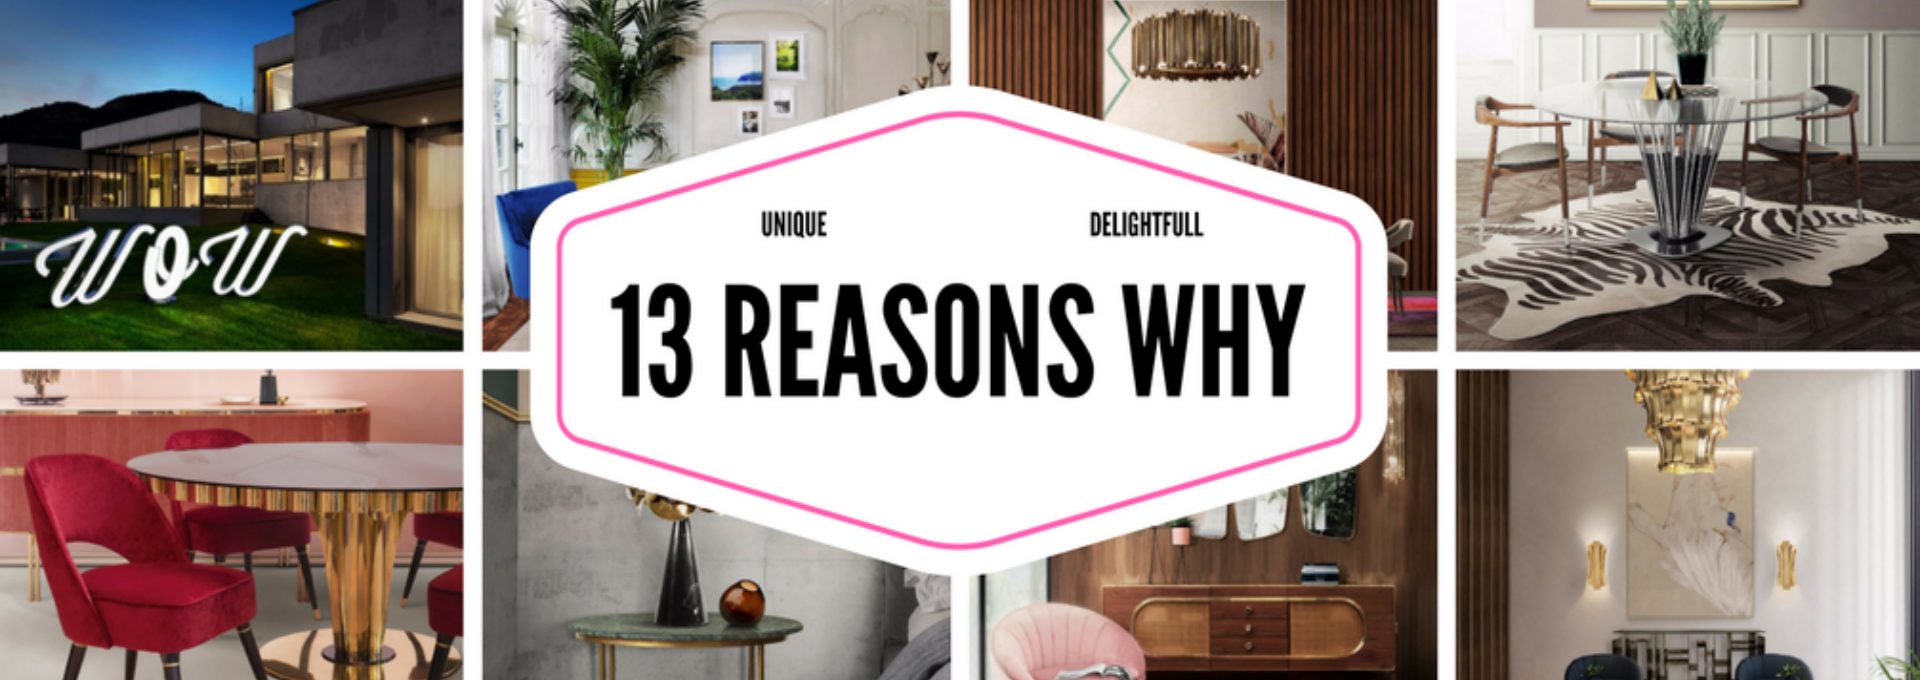 13 Reasons Why Mid-Century Modern Design Still So Trendy ➤ Discover the season's newest design news and inspiration ideas. Visit Daily Design News and subscribe our newsletter! #dailydesignnews #designnews #designevents #designideas #designicons